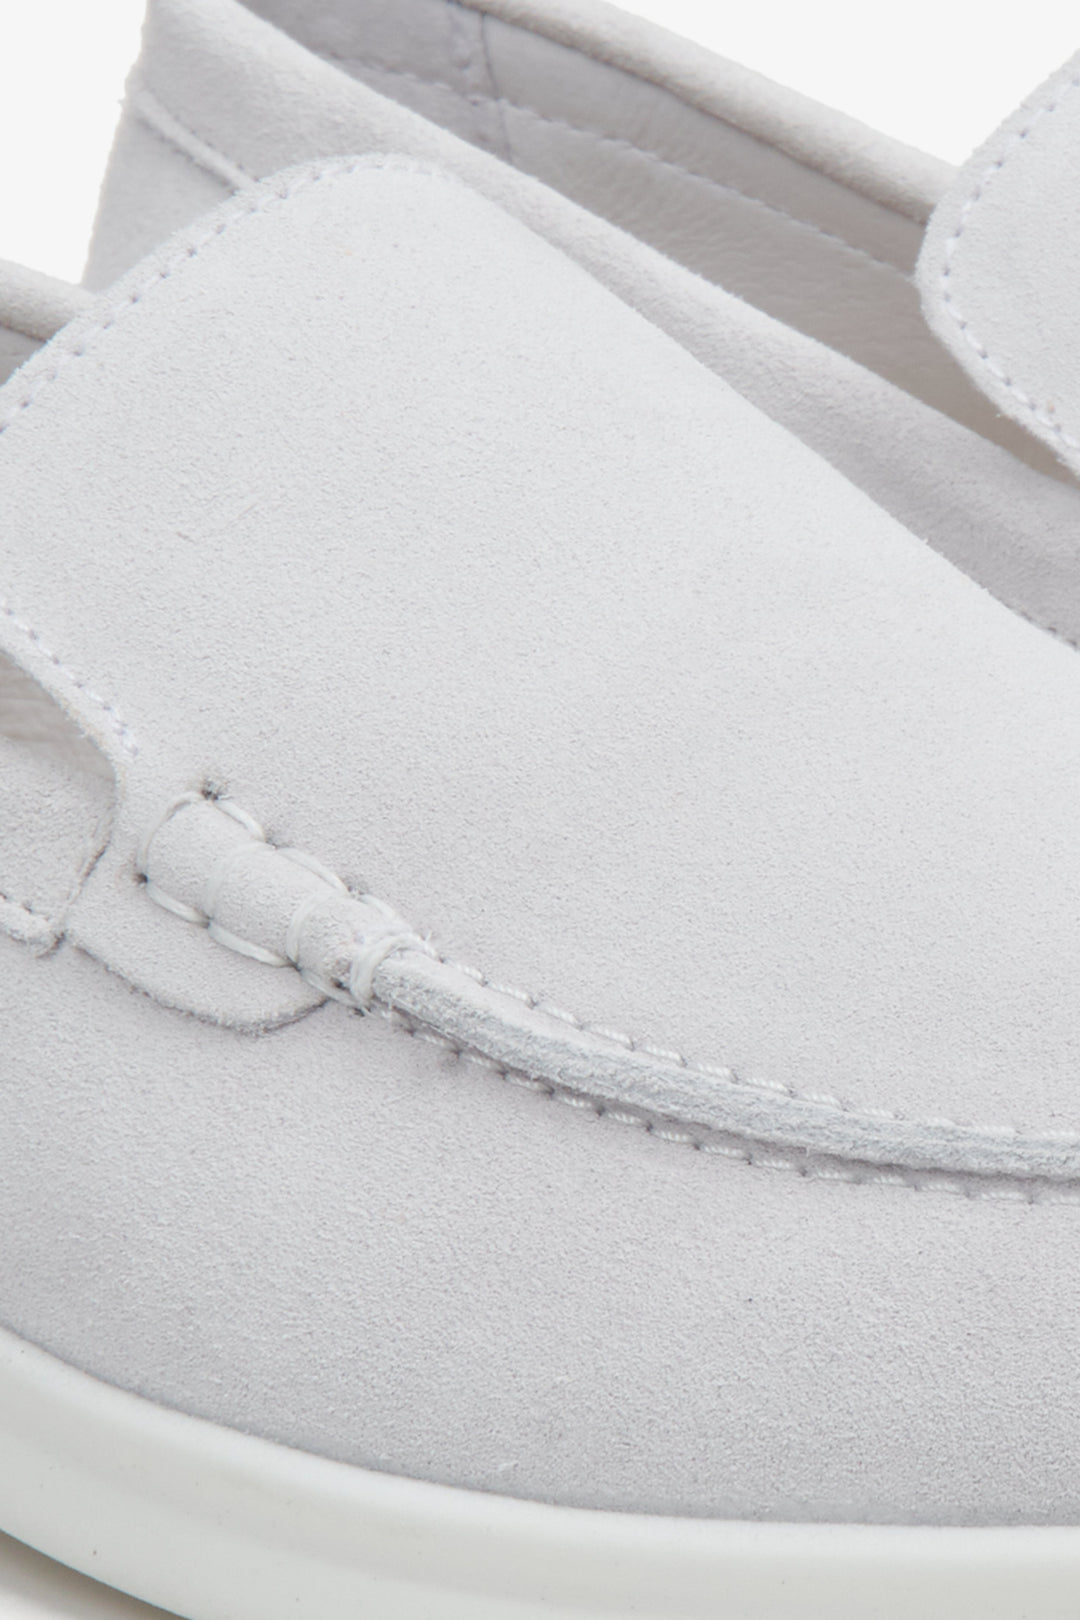 Women's light grey suede Estro moccasins - close-up of the sewing system.